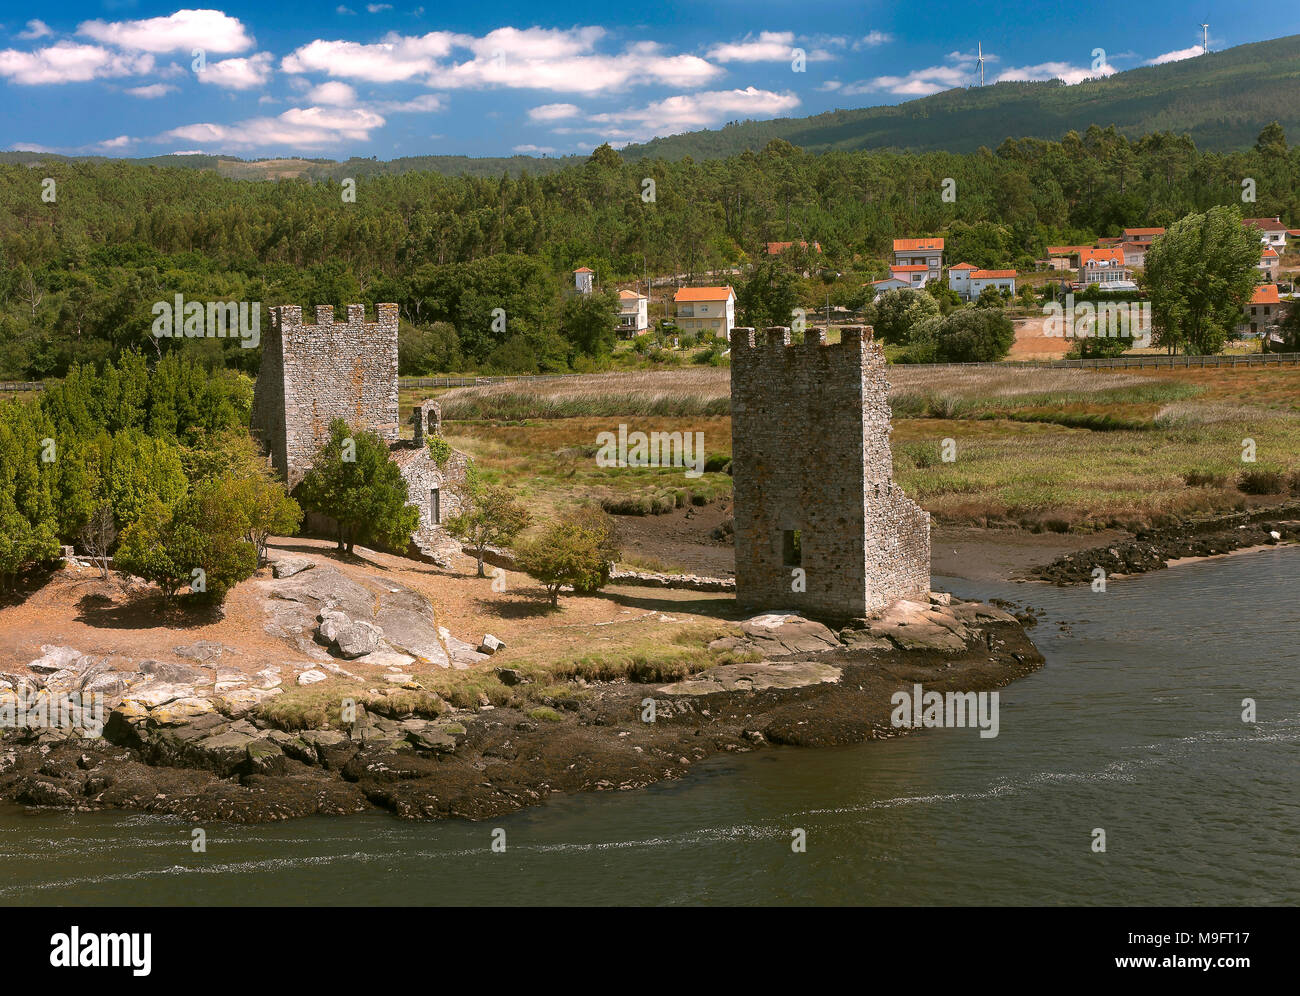 Ulla river and Torres del Oeste (West Towers, also called Viking Towers). Catoira. Pontevedra province. Region of Galicia. Spain. Europe Stock Photo